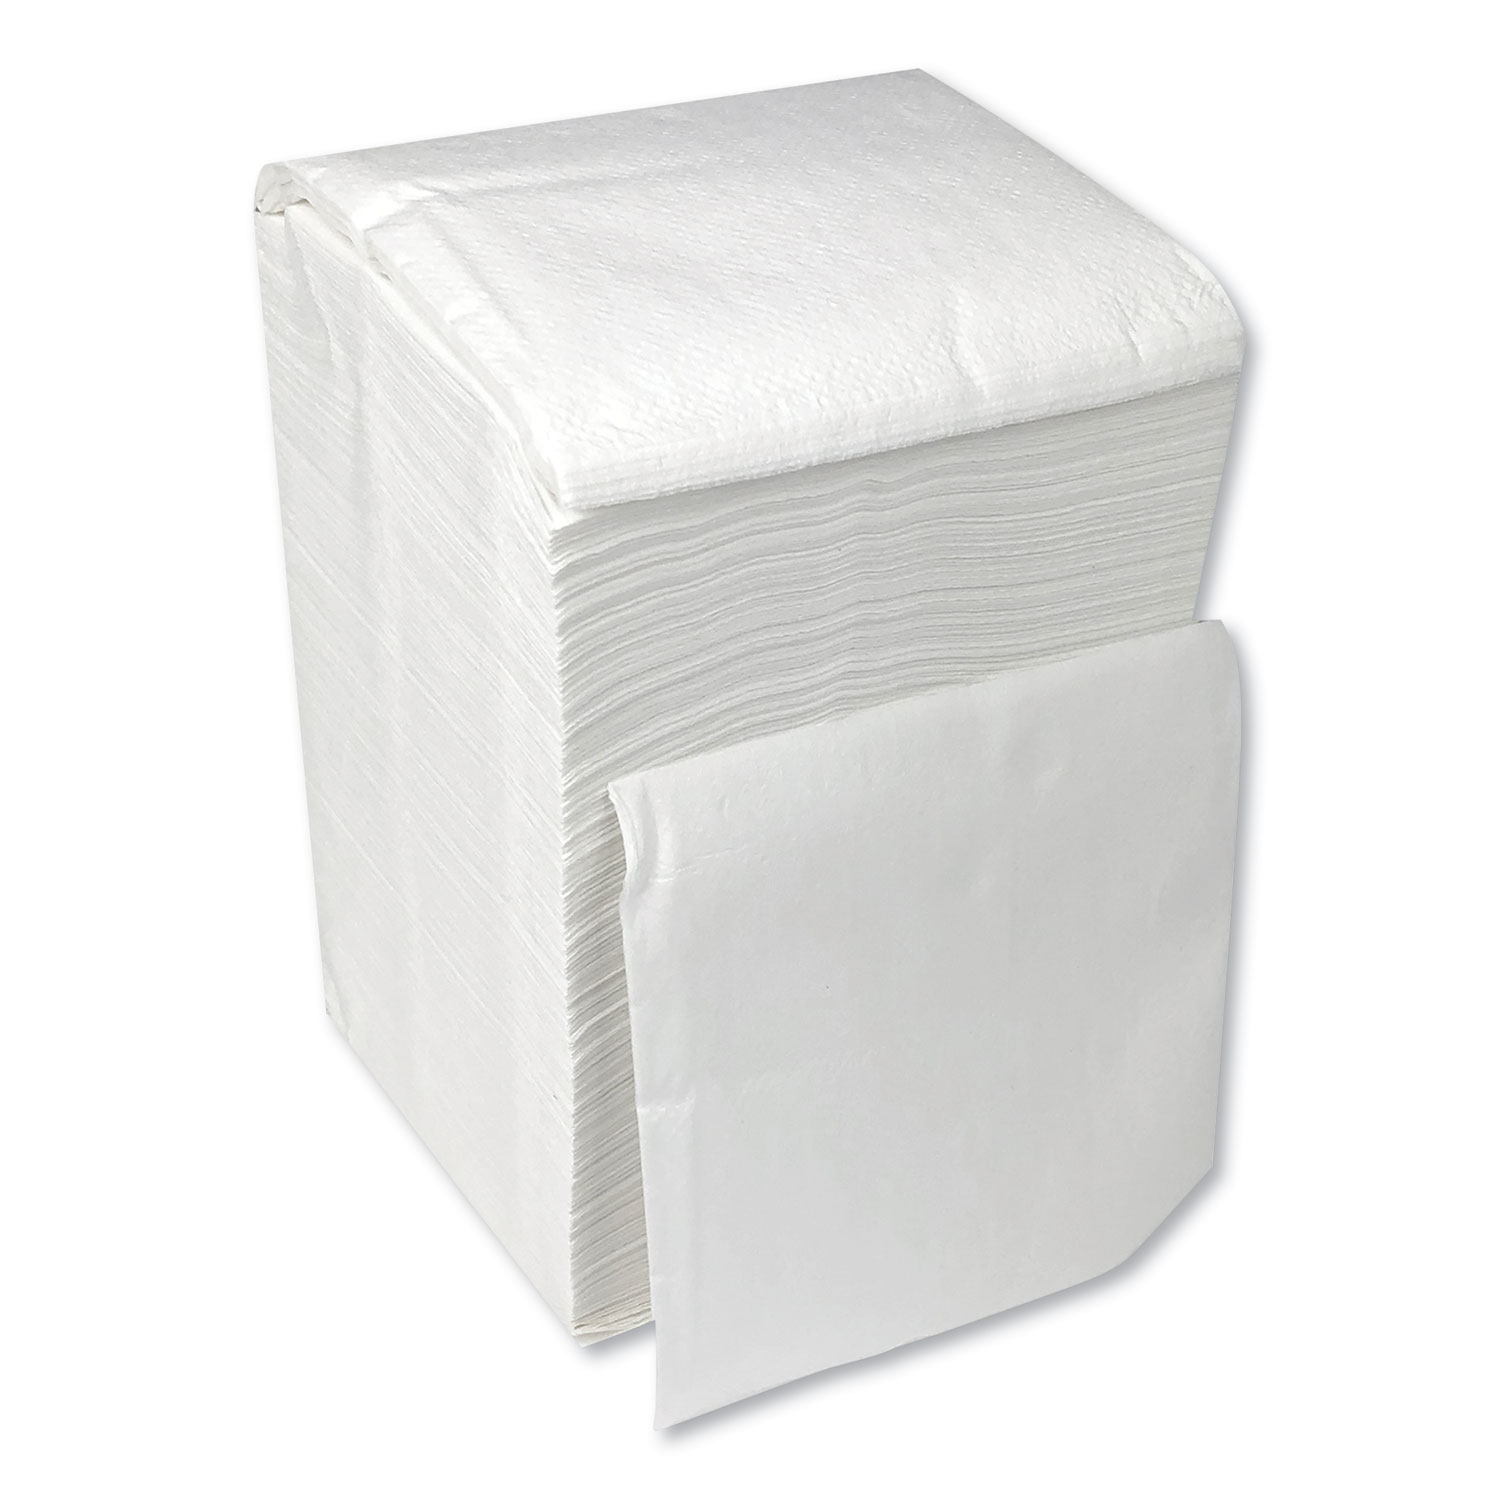 Square Paper Napkins, White Disposable Napkin, 9 x 9 Cocktail and  Cleaning Surfaces Single-Use Napkins - 1-ply, 1/4 fold - Pack of 500 (1  pack of